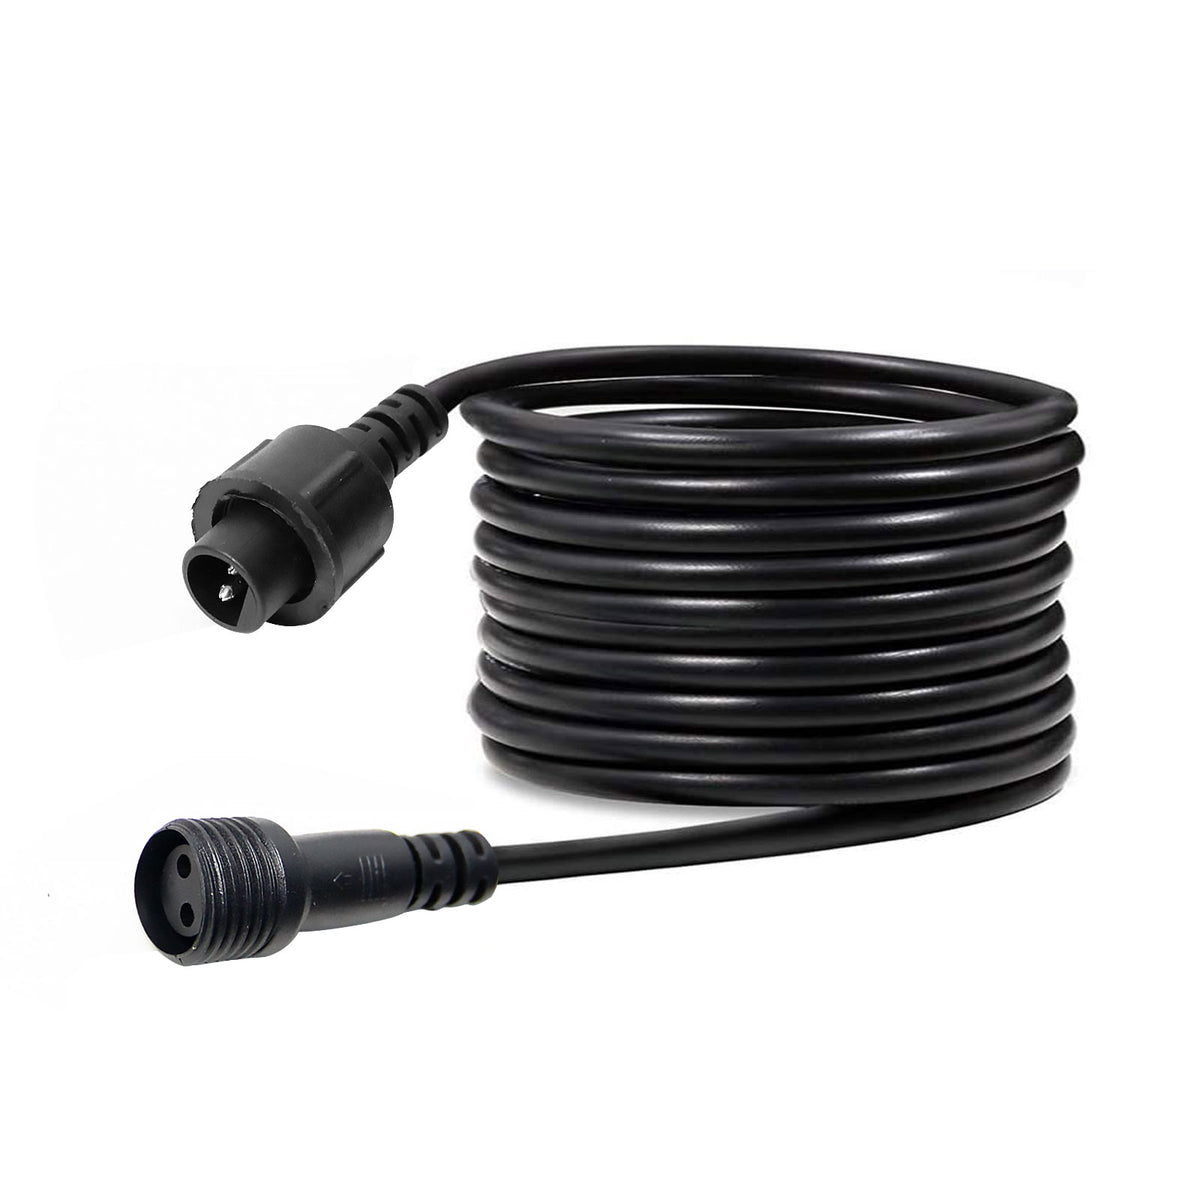 Brimax Extension Cable 3m 9.8Ft for Newest Smaller 2PIN 2×0.5mm² S14 & G40 & ST48 String Lights